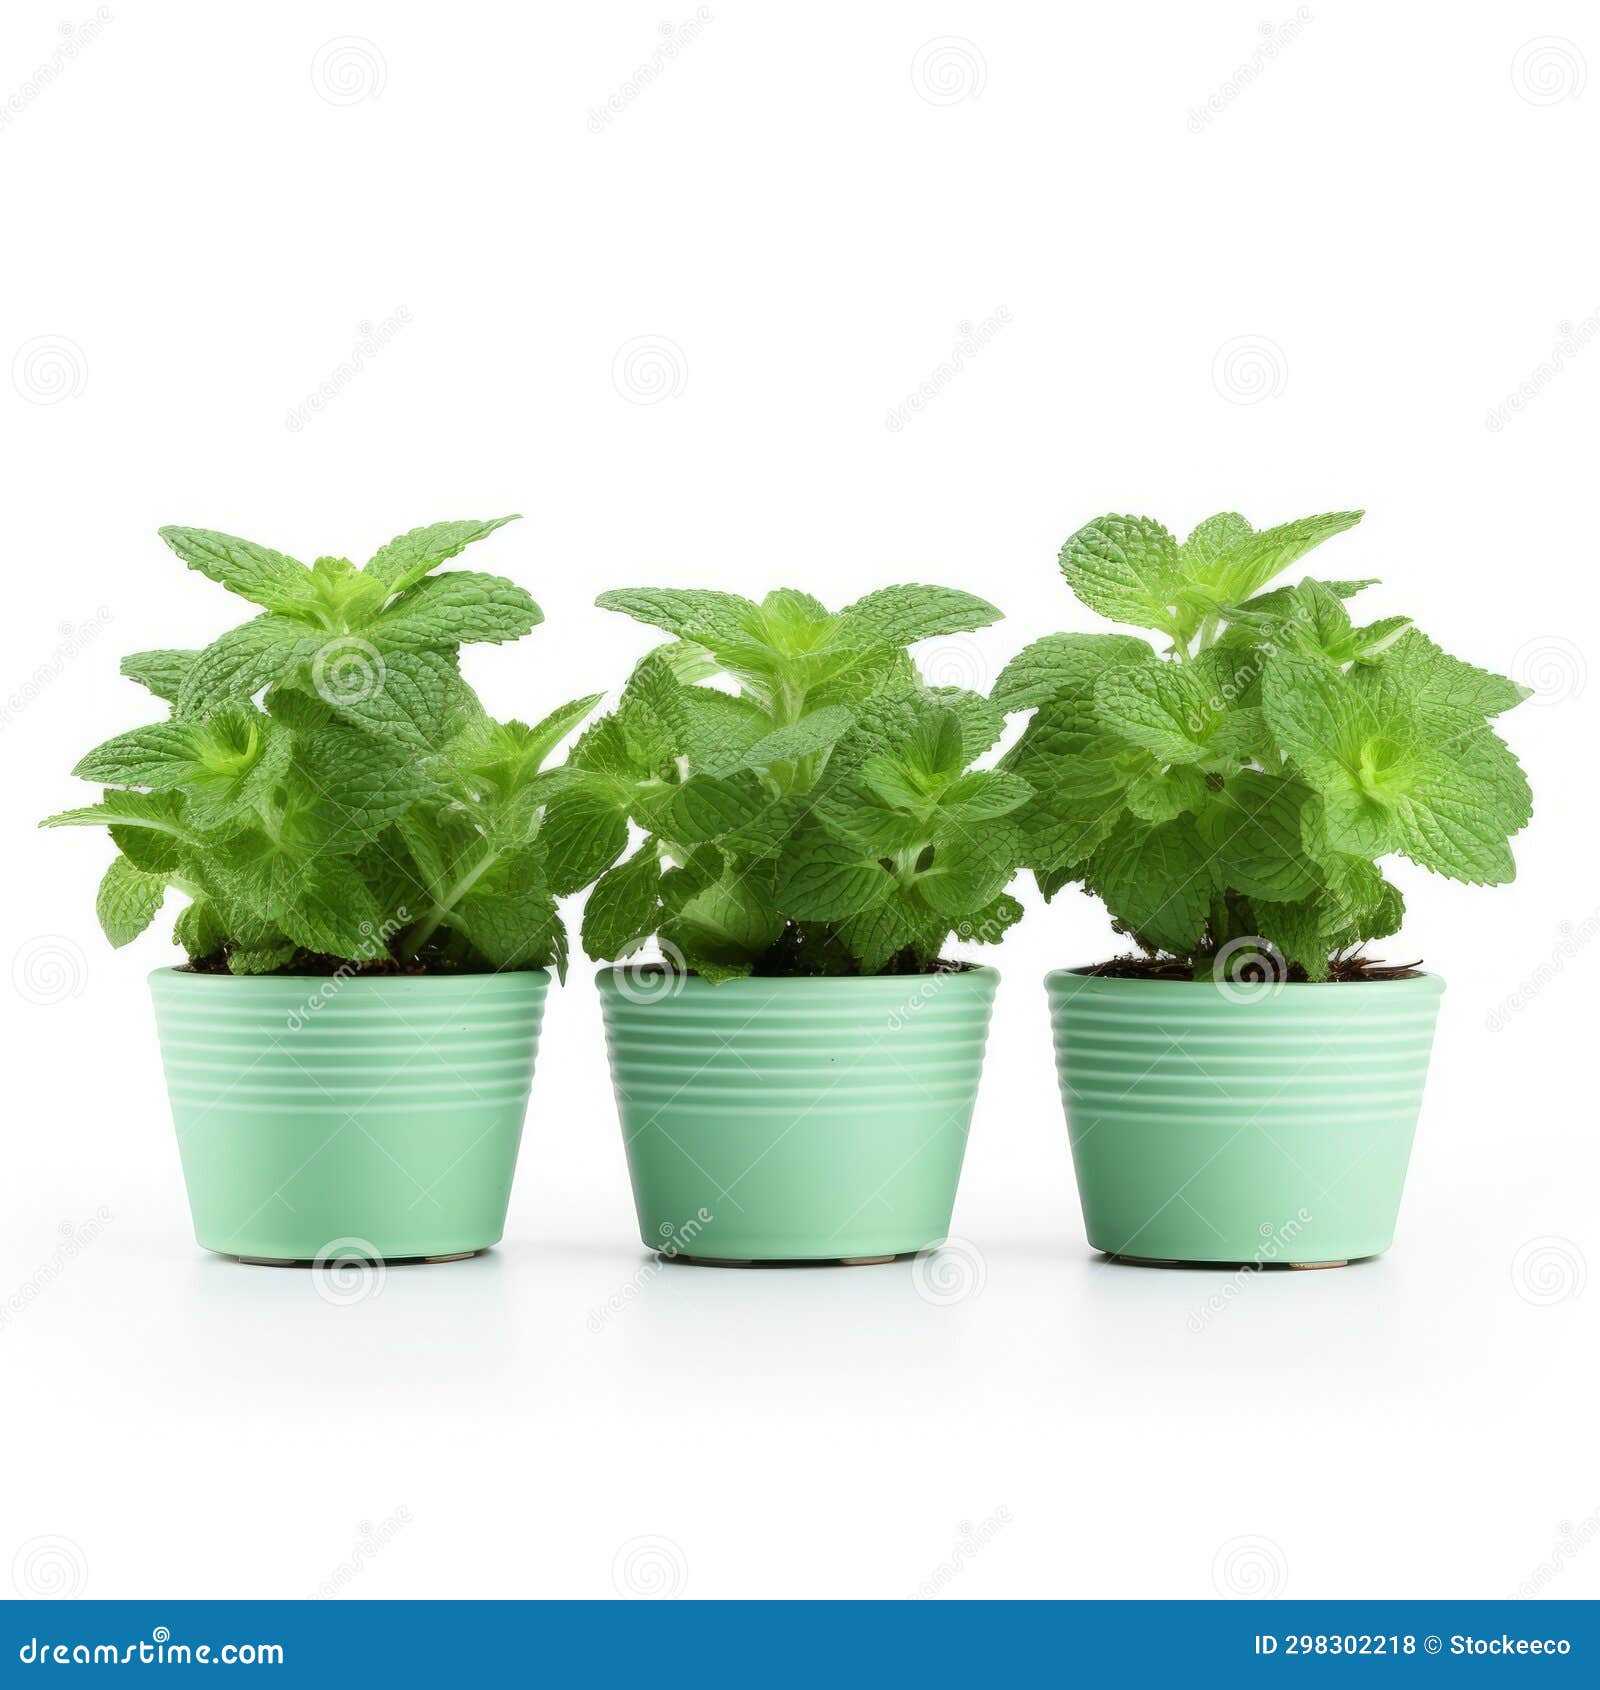 Delicate Mint Plants in Green Pots - a Crisp and Classic Touch